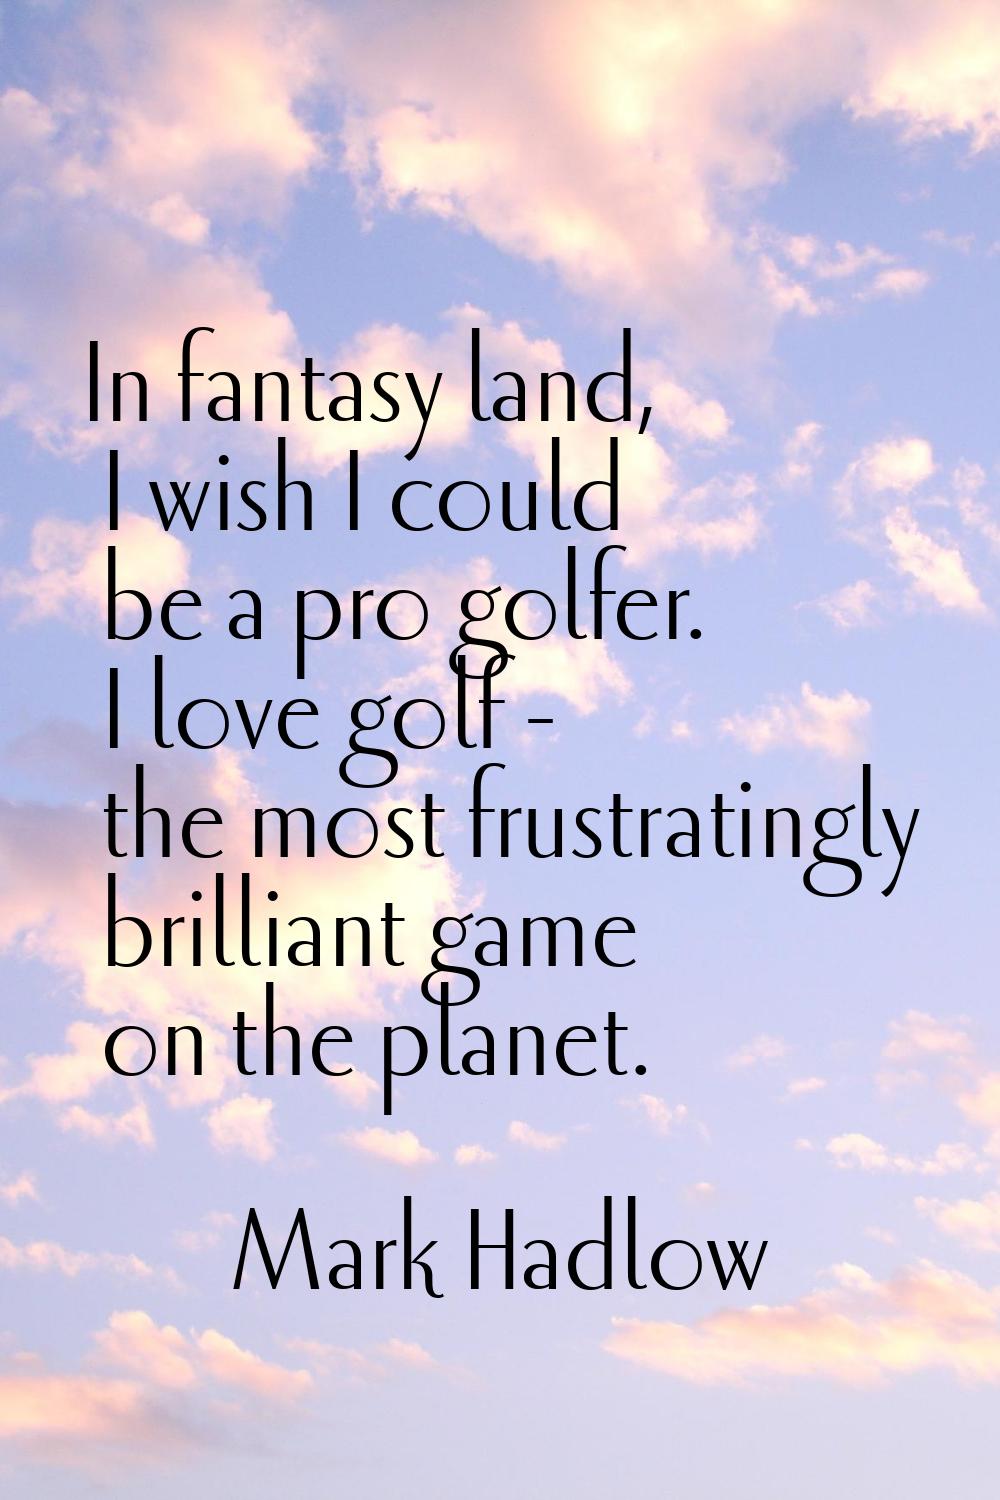 In fantasy land, I wish I could be a pro golfer. I love golf - the most frustratingly brilliant gam